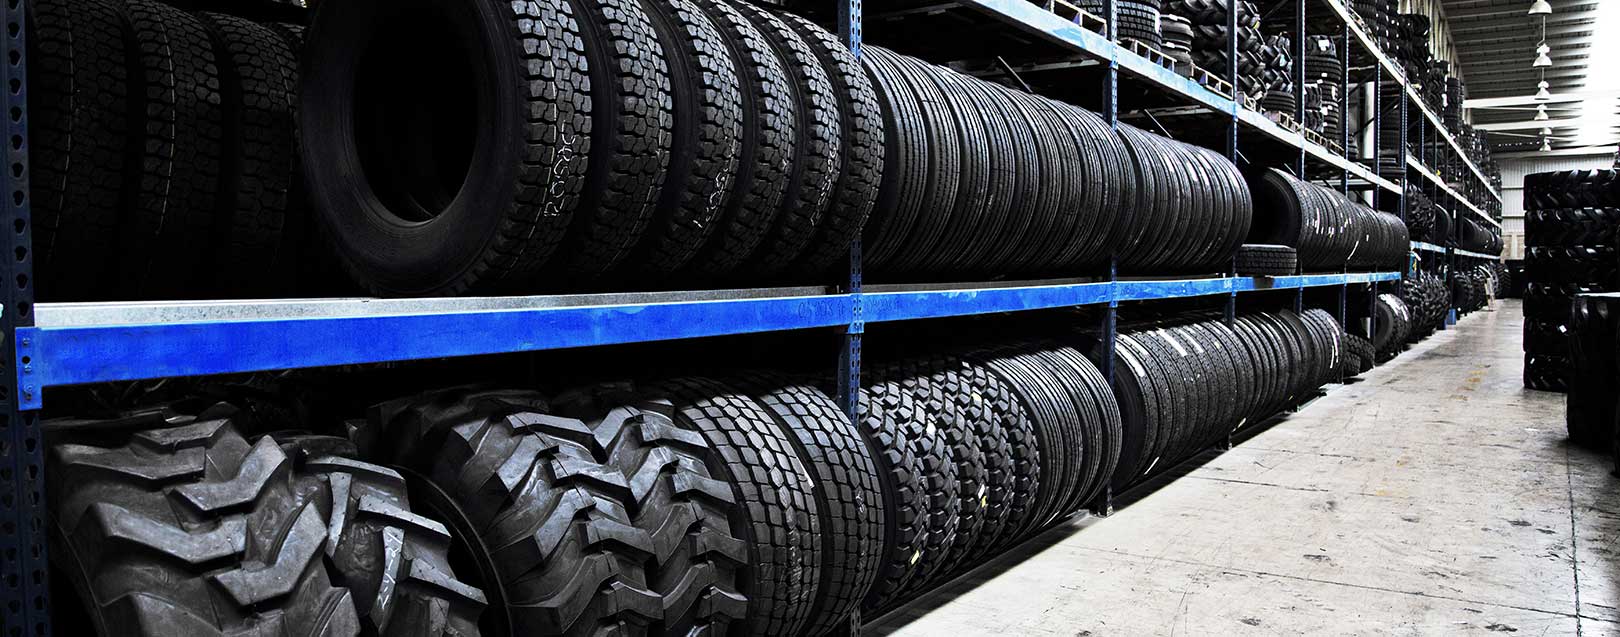 Government to investigate dumping of Chinese tyres